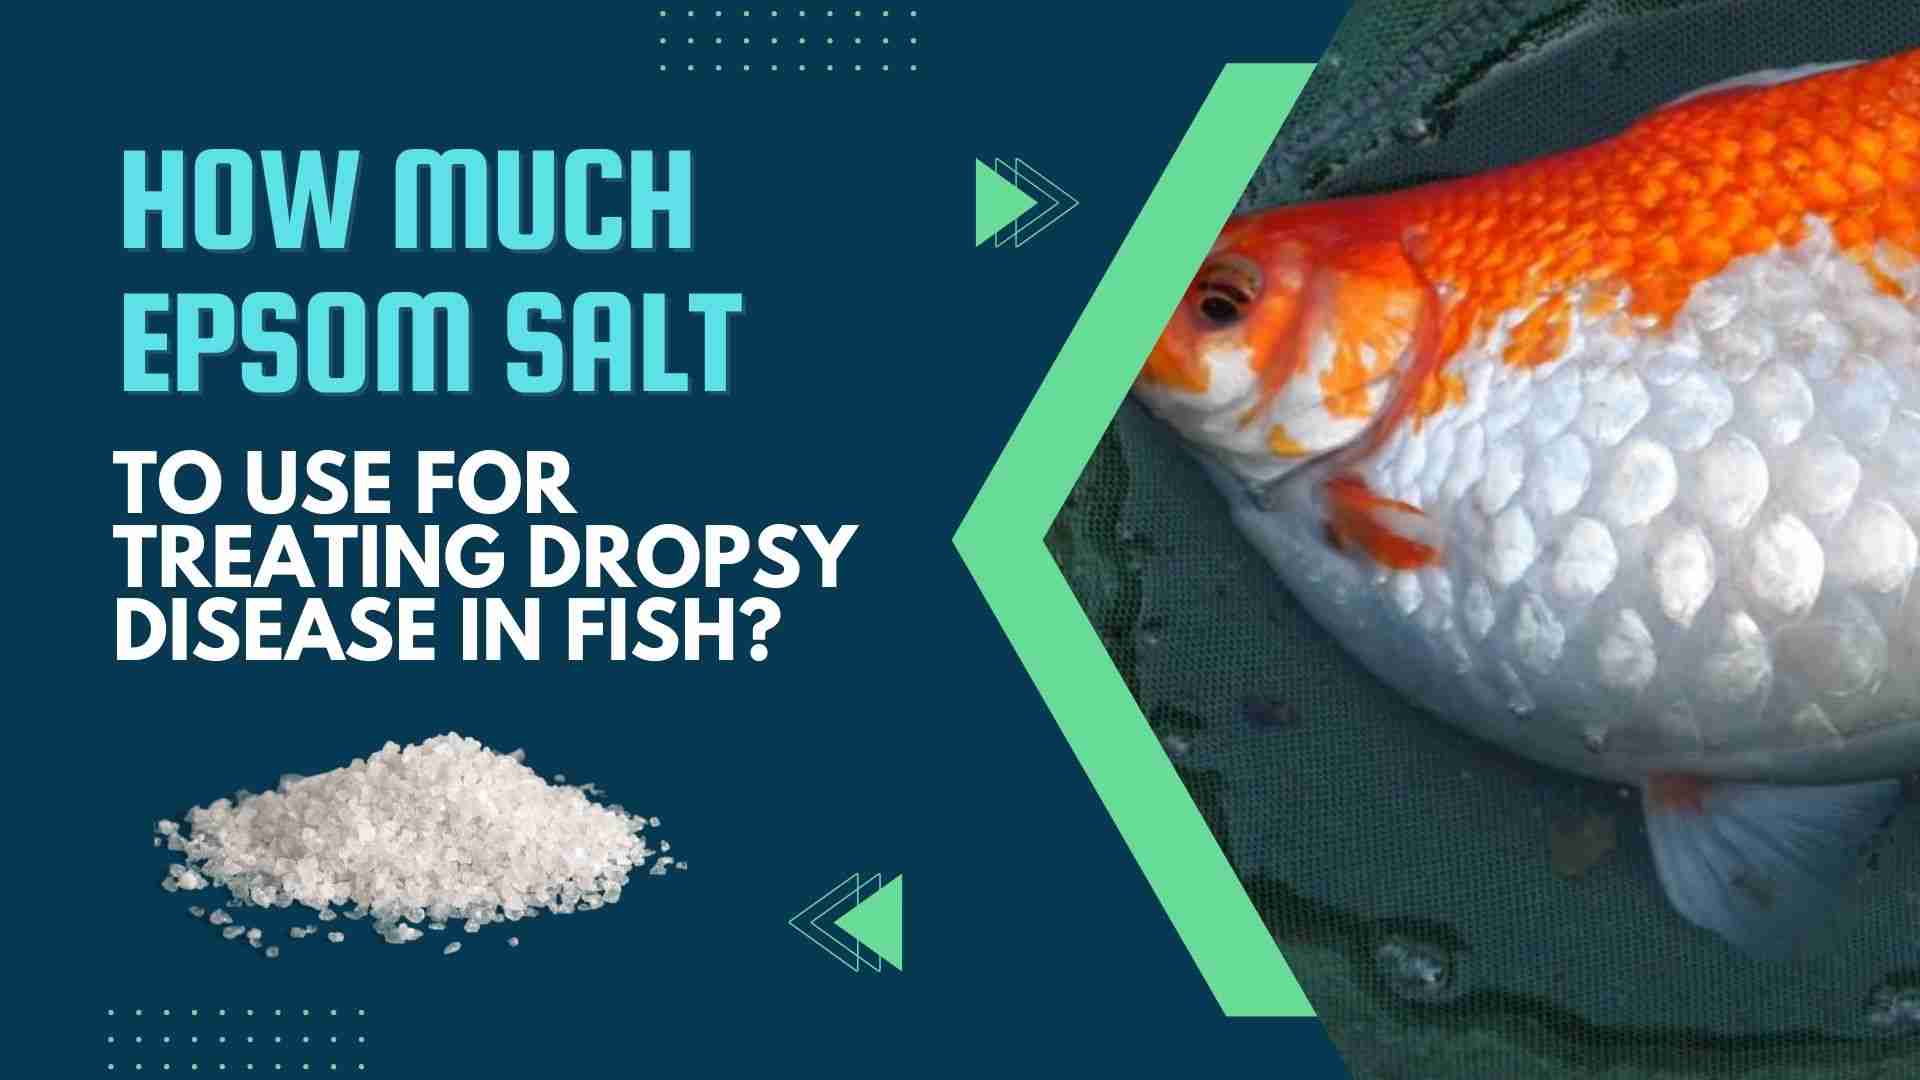 How Much Epsom Salt Should You Use for Treating Dropsy Disease in Fish